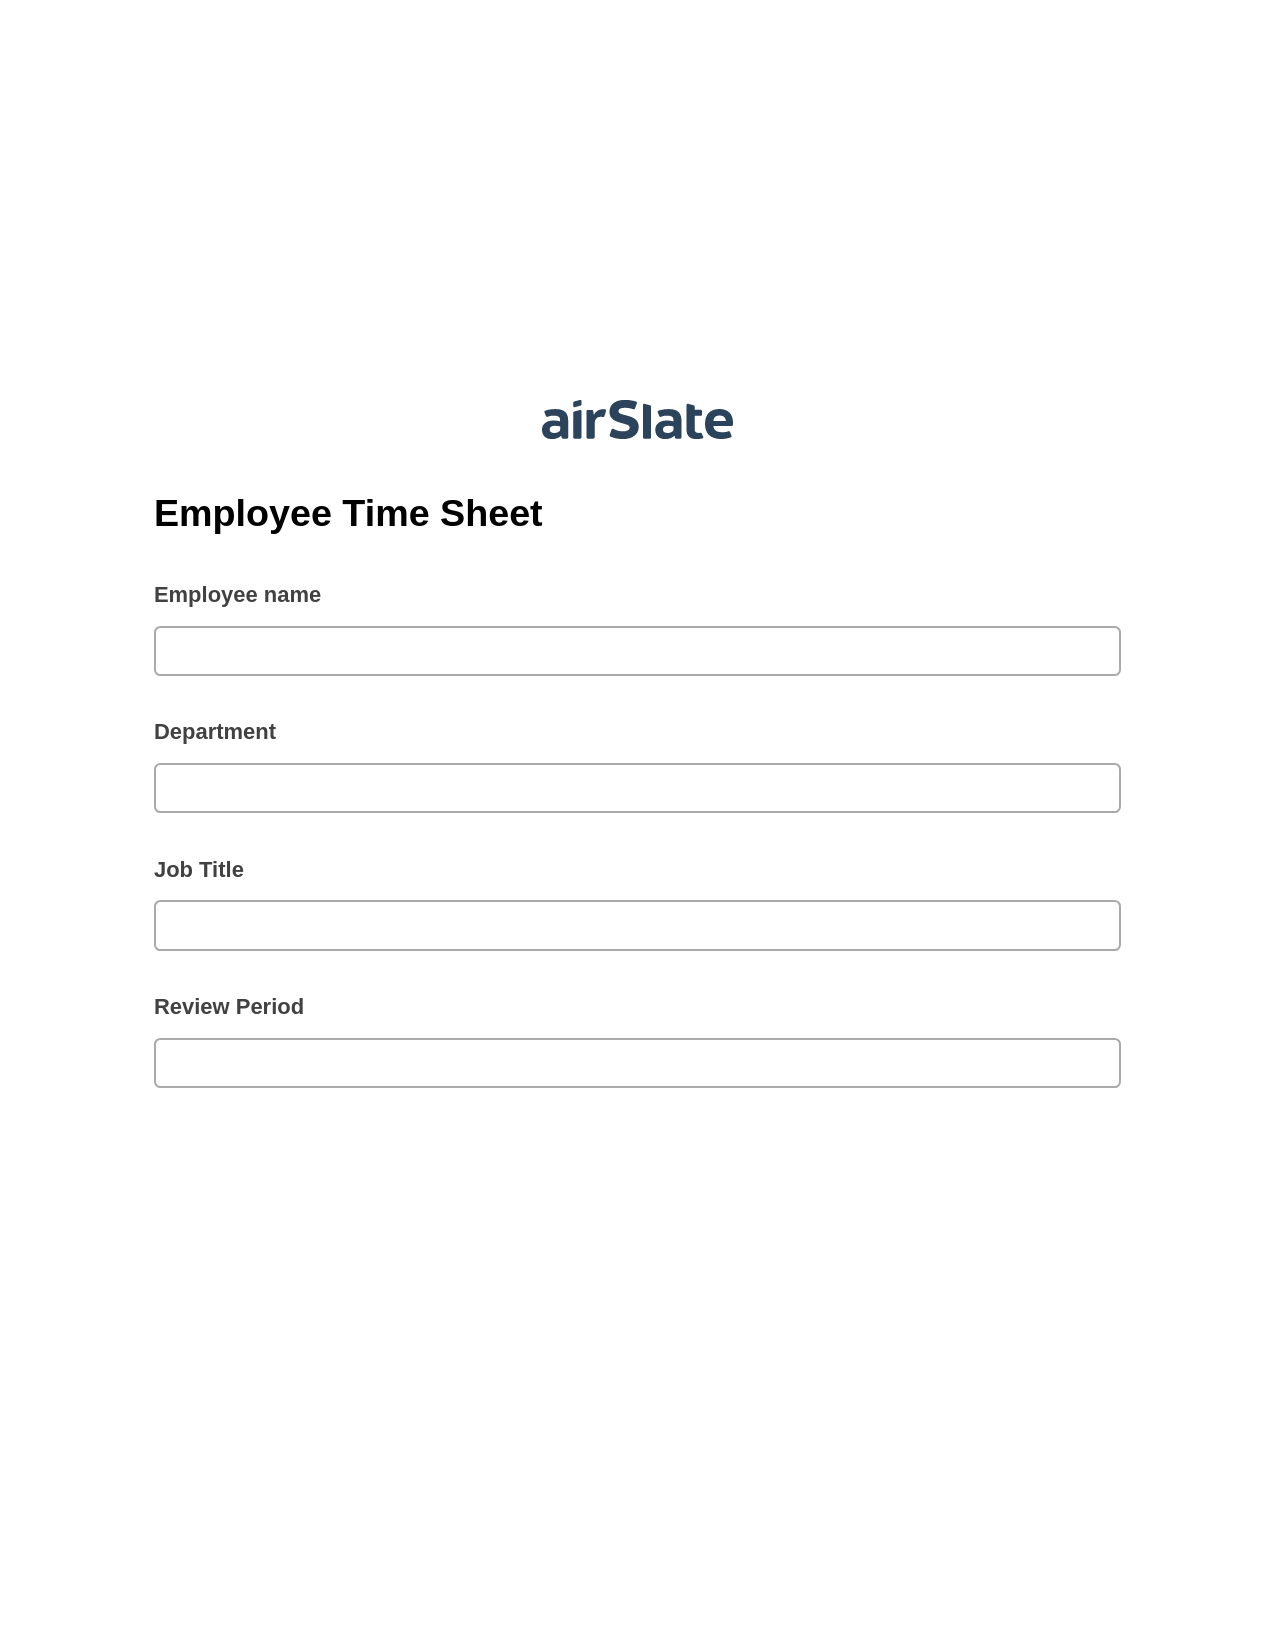 Employee Time Sheet Pre-fill from Smartsheet Bot, Update Audit Trail Bot, Archive to Box Bot